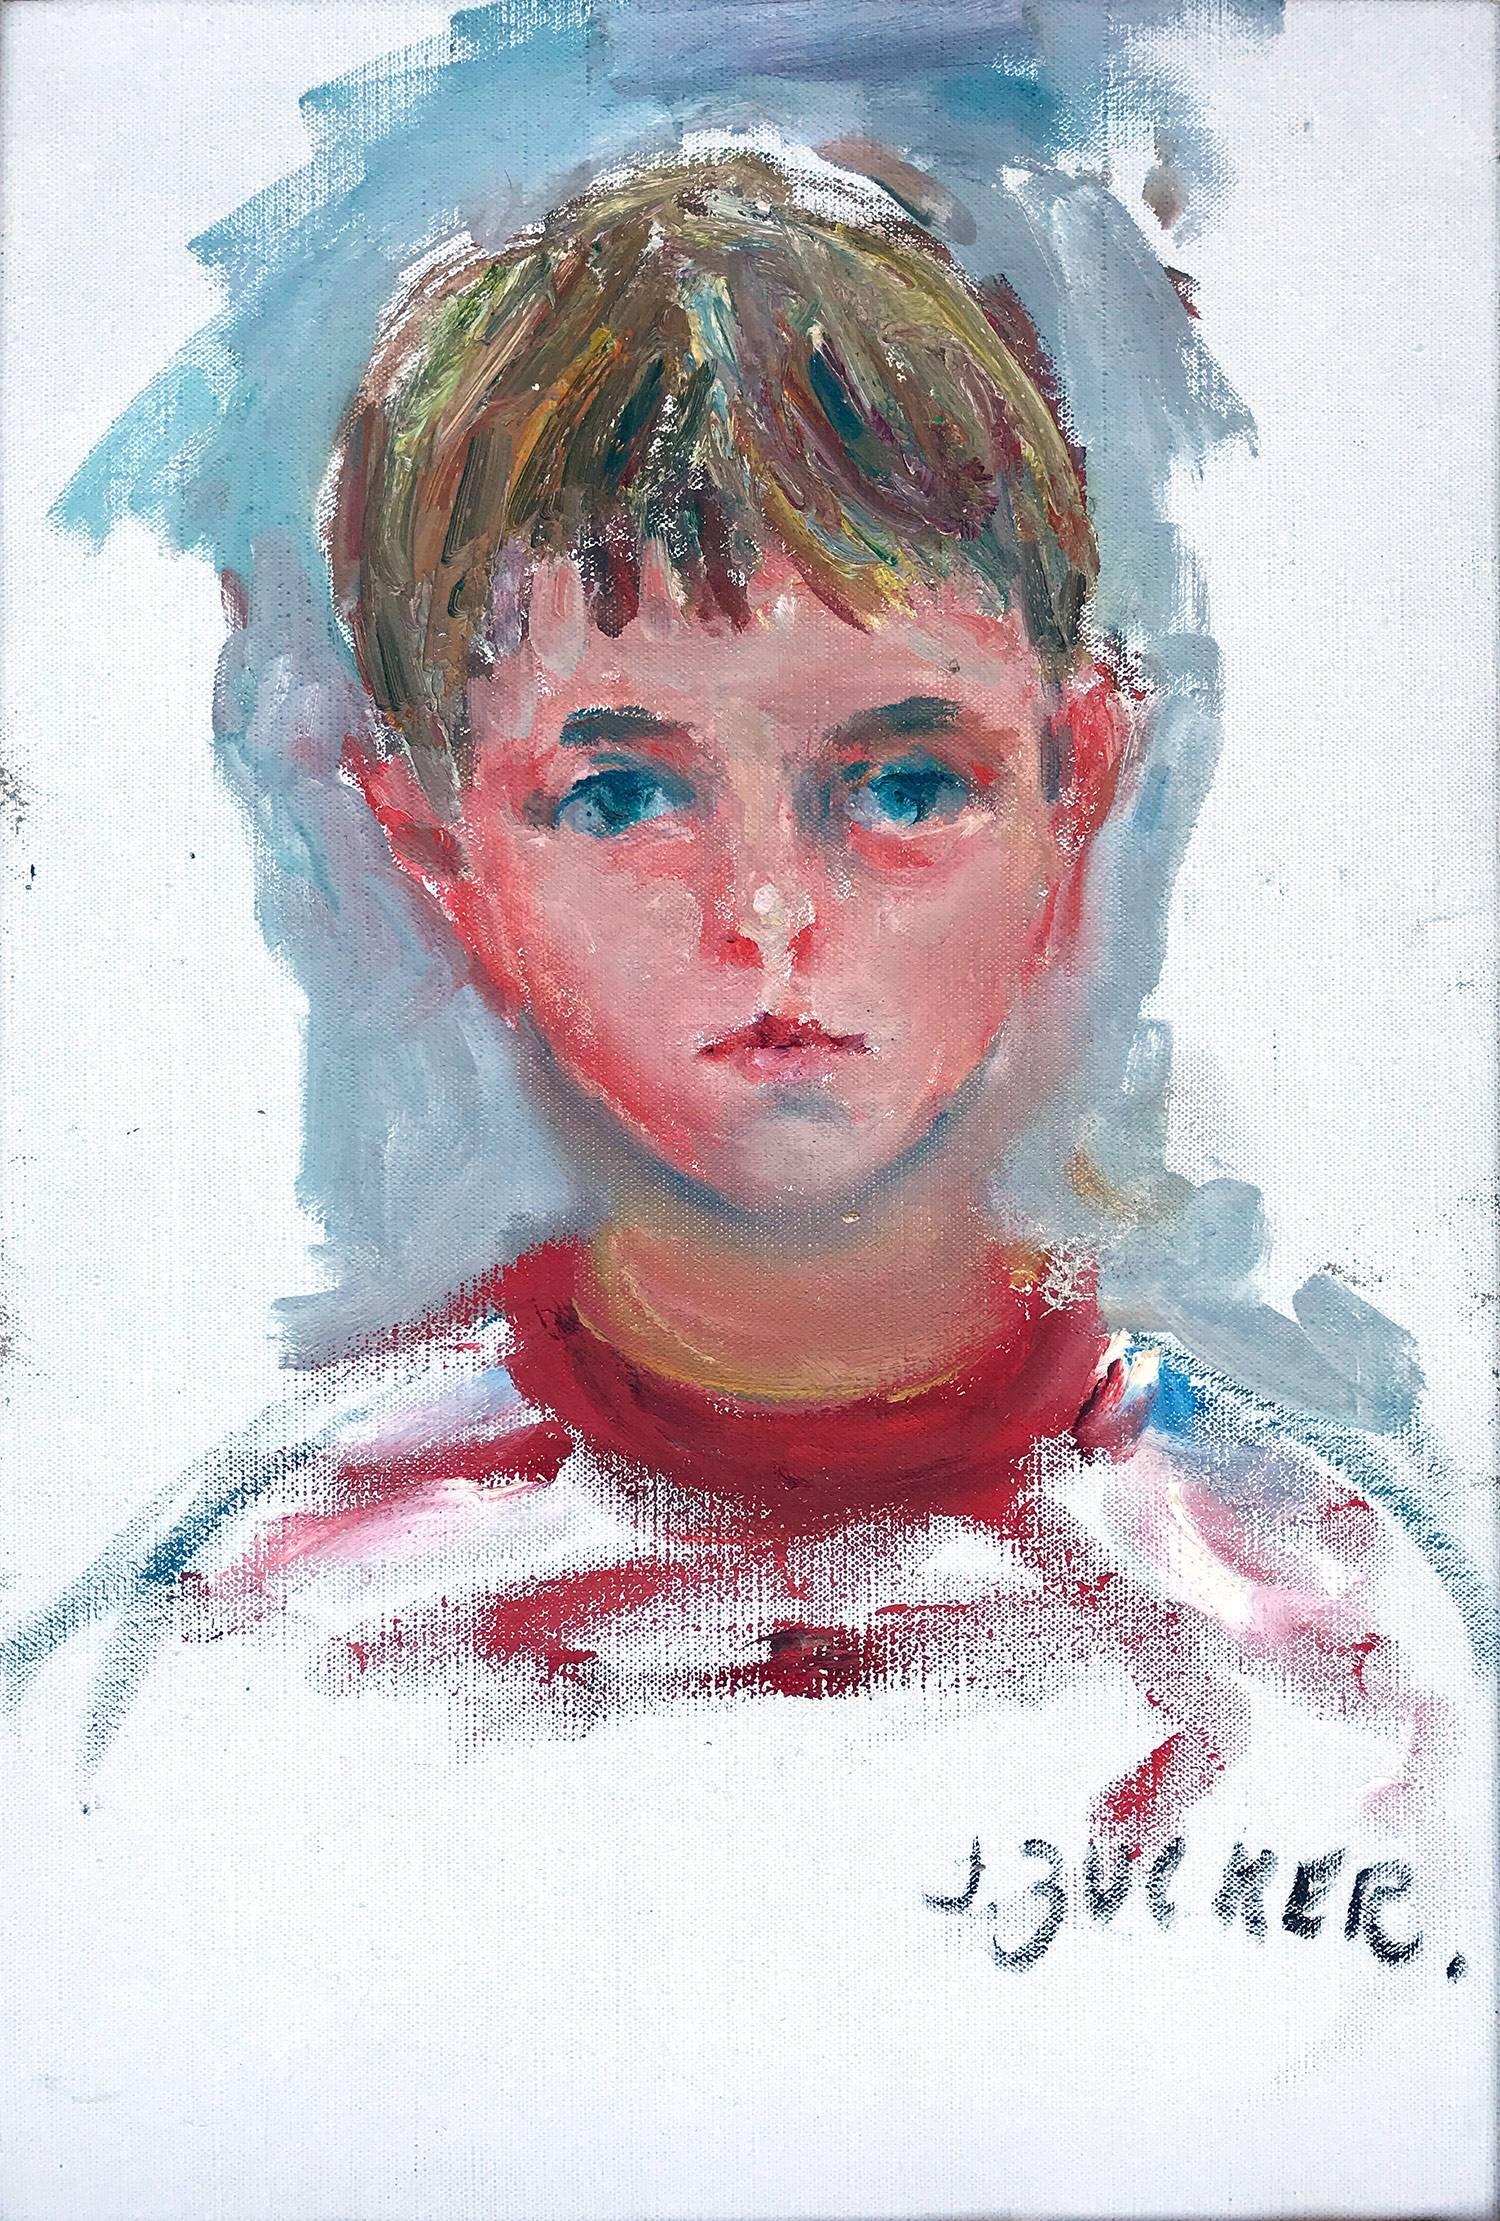 Portrait of a Blond Boy - Painting by Jacques Zucker